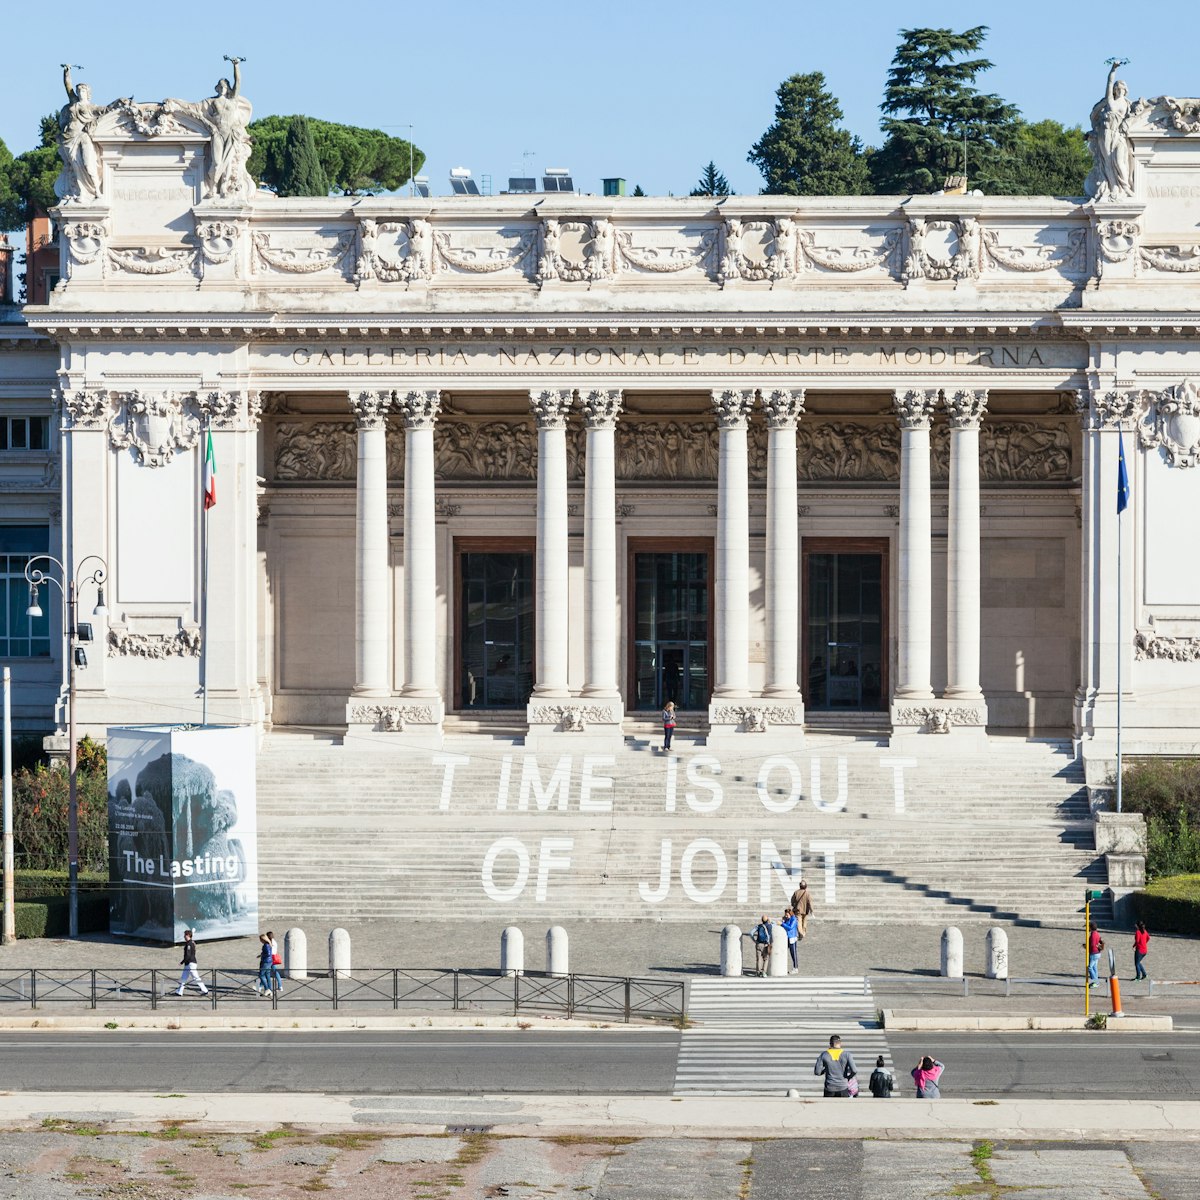 Rome, Italy - November 1, 2016: front view of Galleria Nazionale d'Arte Moderna (GNAM, National Gallery of Modern Art) art gallery, founded in 1883, in Villa Borghese public gardens in Rome city
629202620
Ornamental Garden, Travel, People Traveling, Villa Borghese, Building Exterior, City Life, Landscaped, Municipal Gallery Of Modern Art, Facade, Art, Art Museum, Modern, Italian Culture, Cultures, National Landmark, Architecture, Urban Scene, Outdoors, Front View, Tourist, People, Rome - Italy, Italy, House, Museum, Park - Man Made Space, Palace, Built Structure, Cityscape, Town, Gnam
Front view of National Gallery of Modern Art